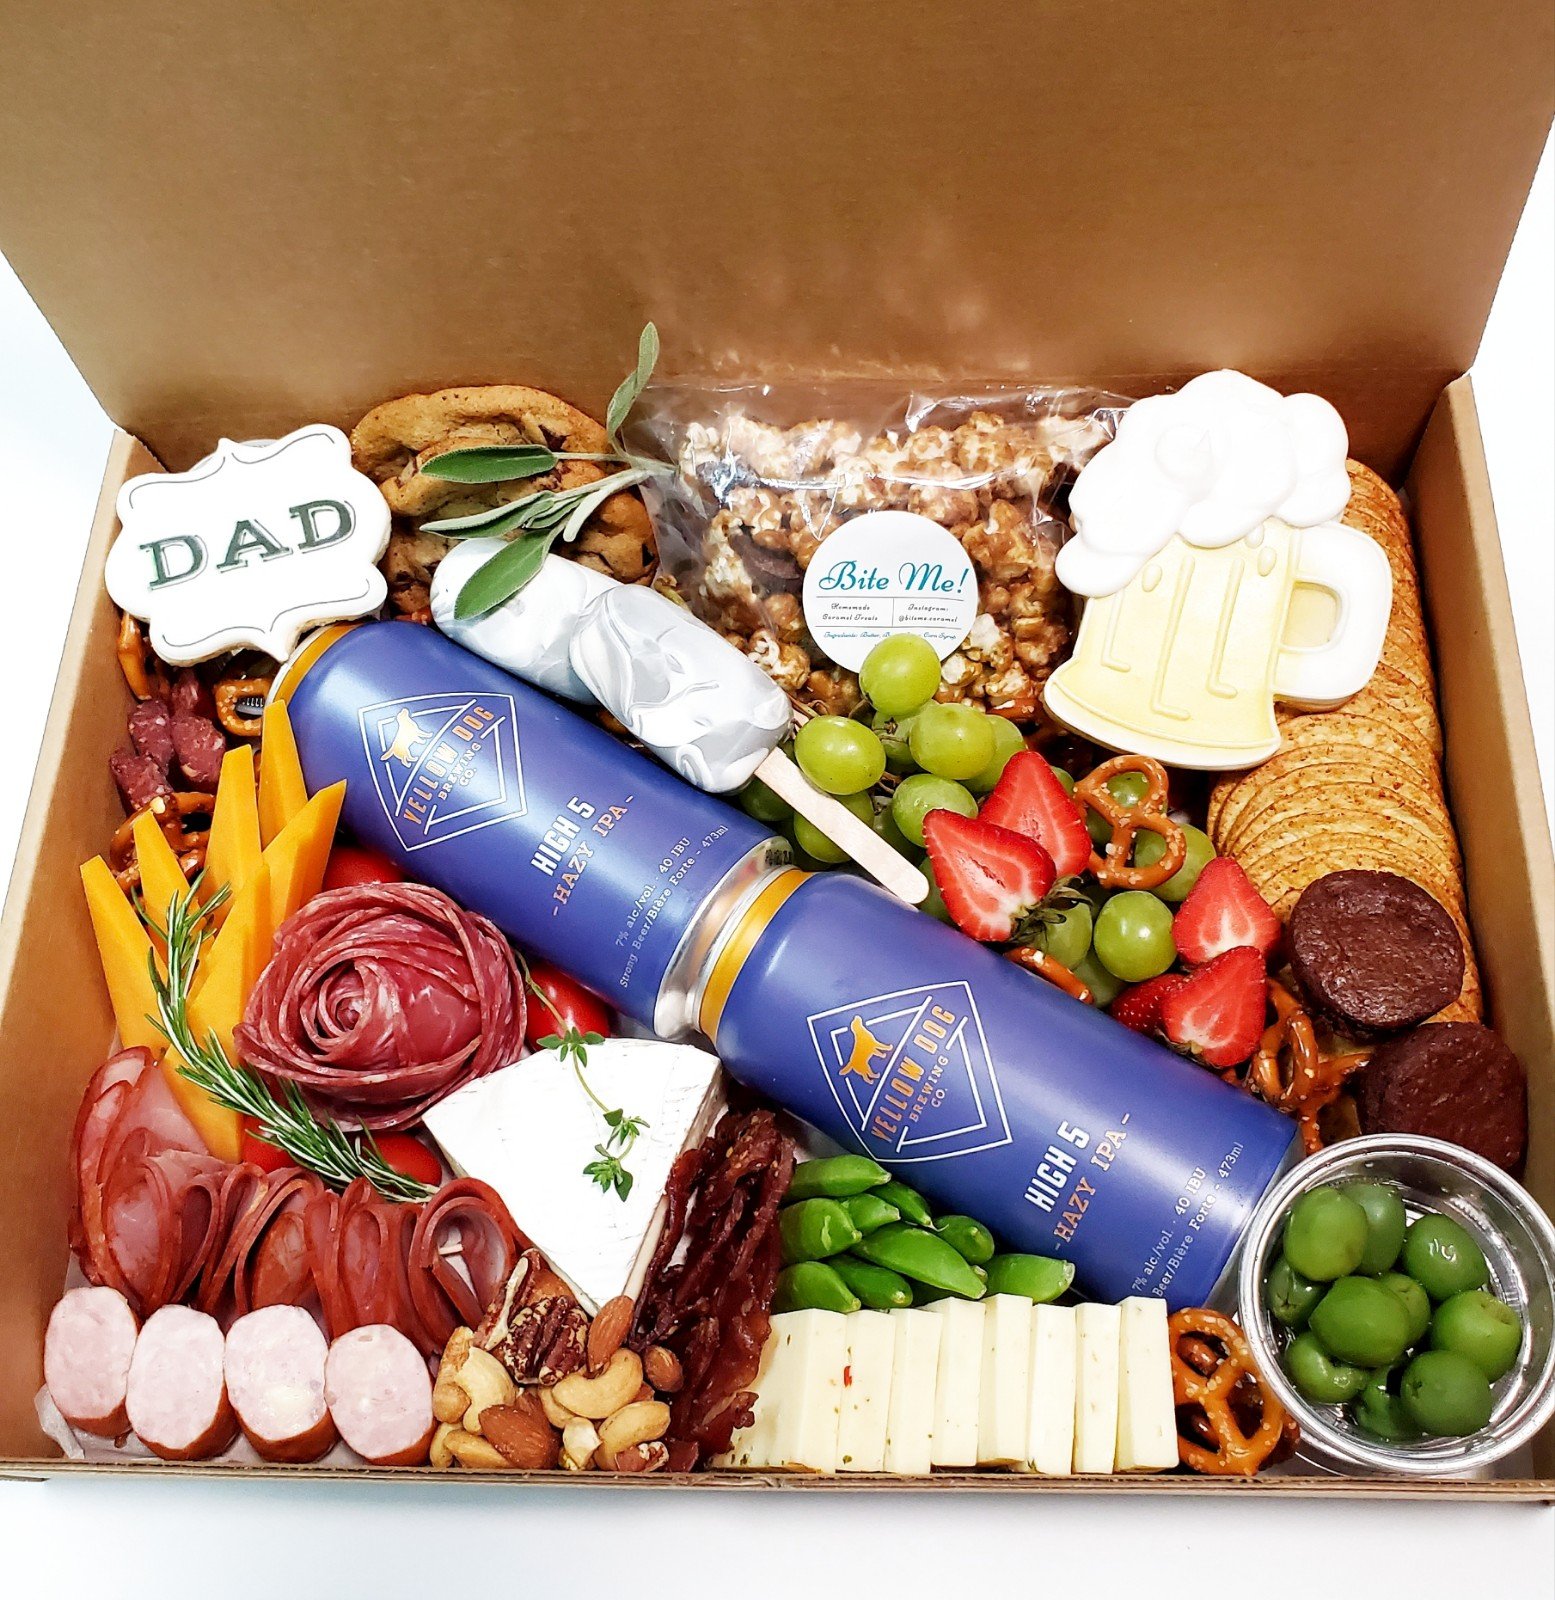 large-beer-fathers-day-charcuterie-cheese-grazing-board-box-eden-west-gourmet-port-moody-canada_1024x1024@2x  - Vancouver Foodie Pulse